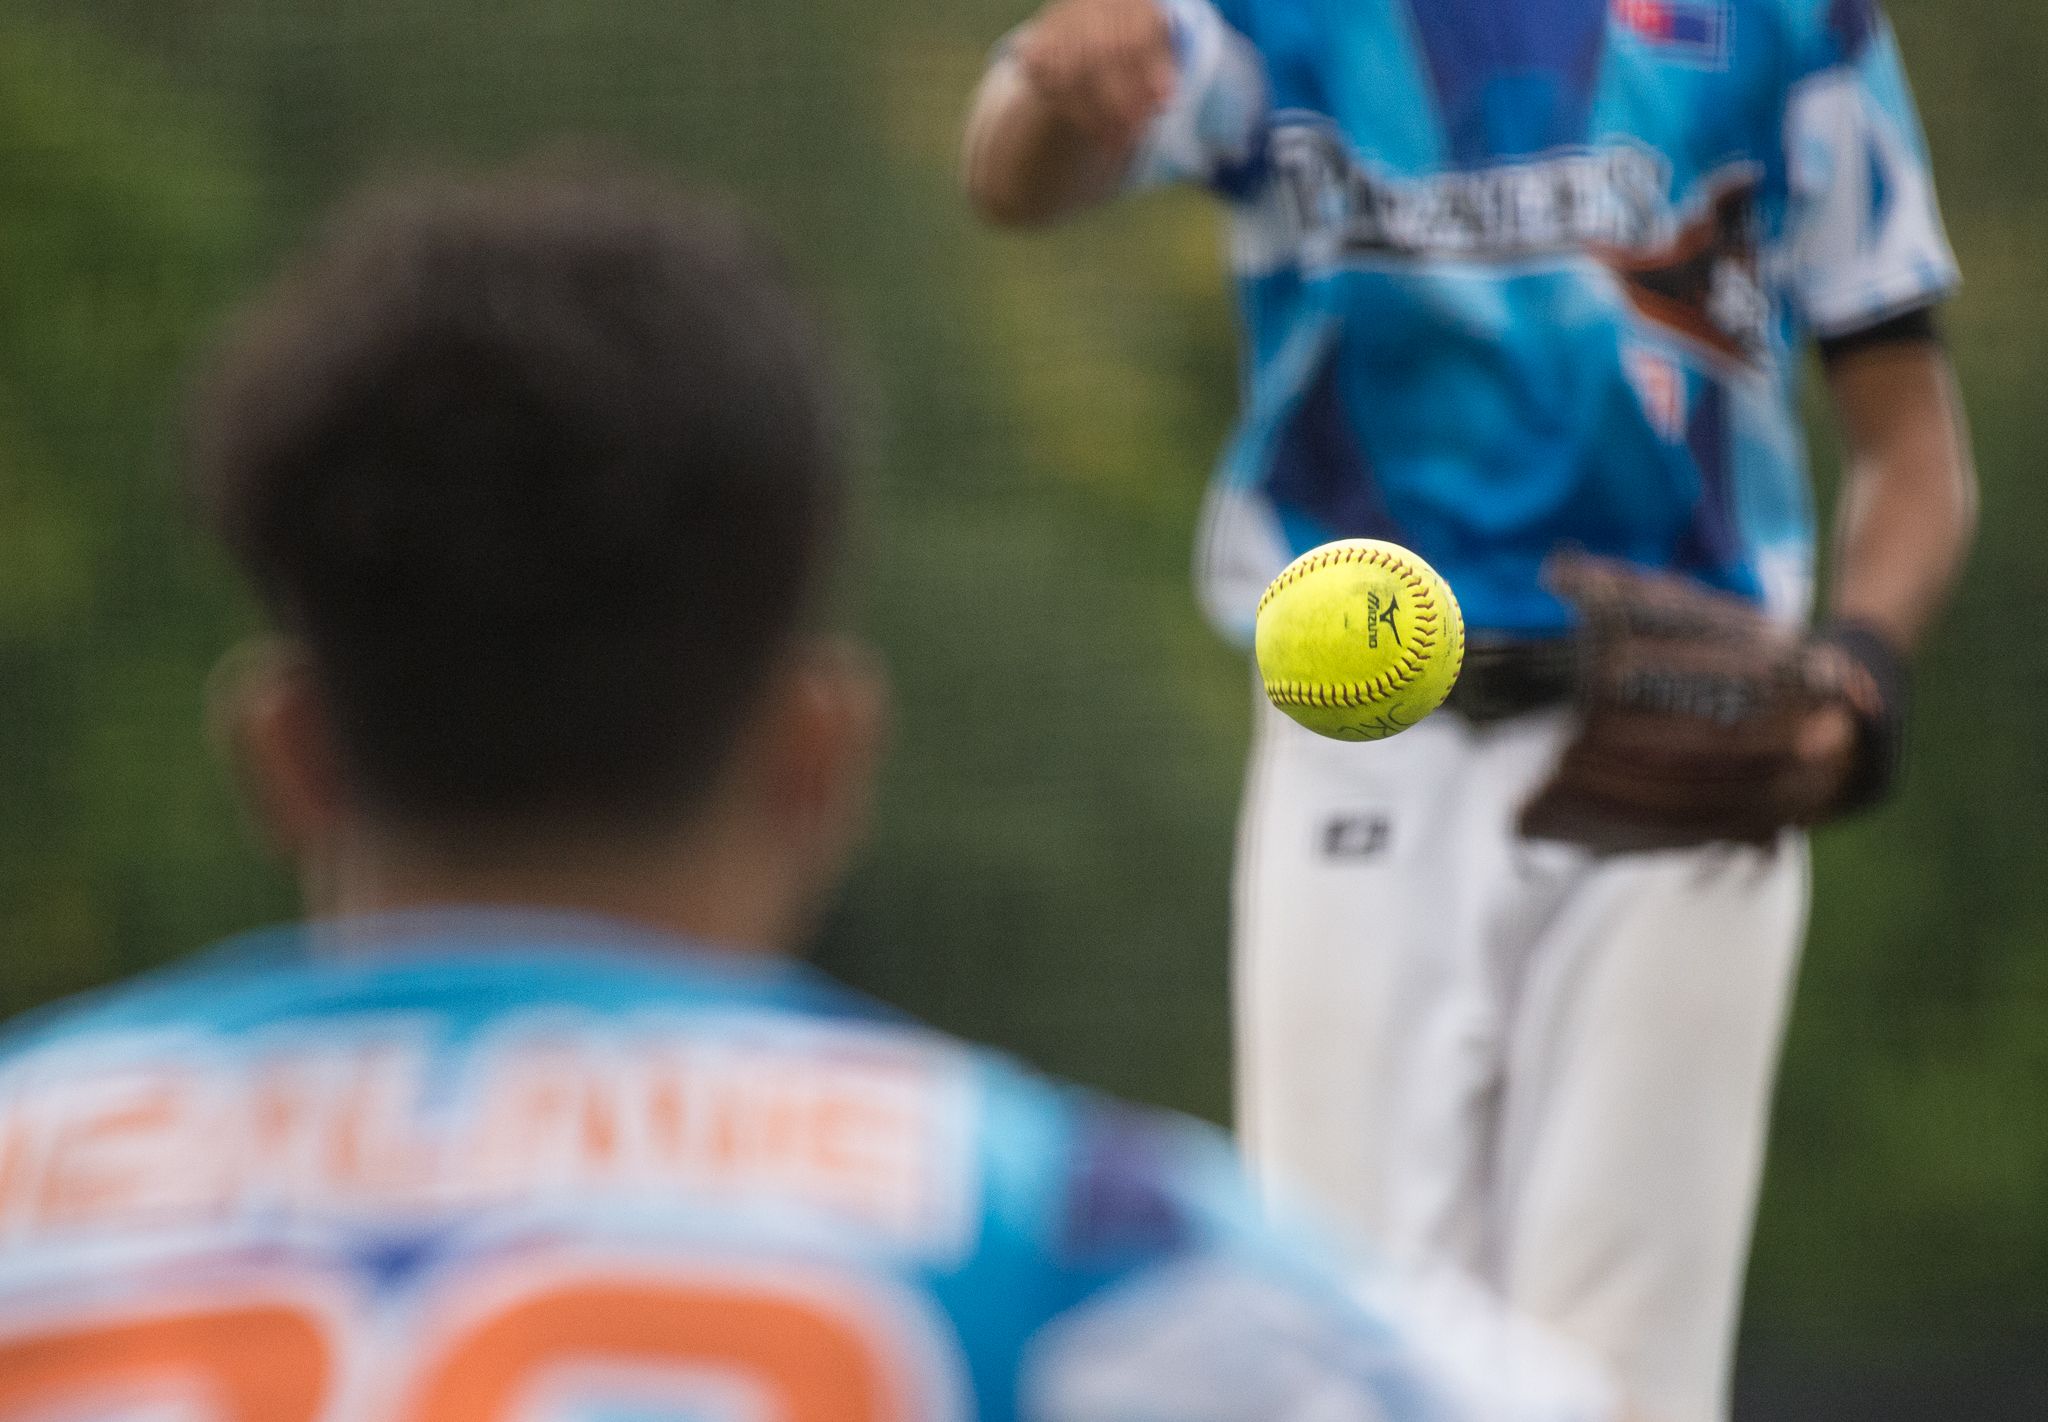 A Malaysian player watches the the ball during the ORA Gryphon Cup slow pitch tournament at Raffles Institution.